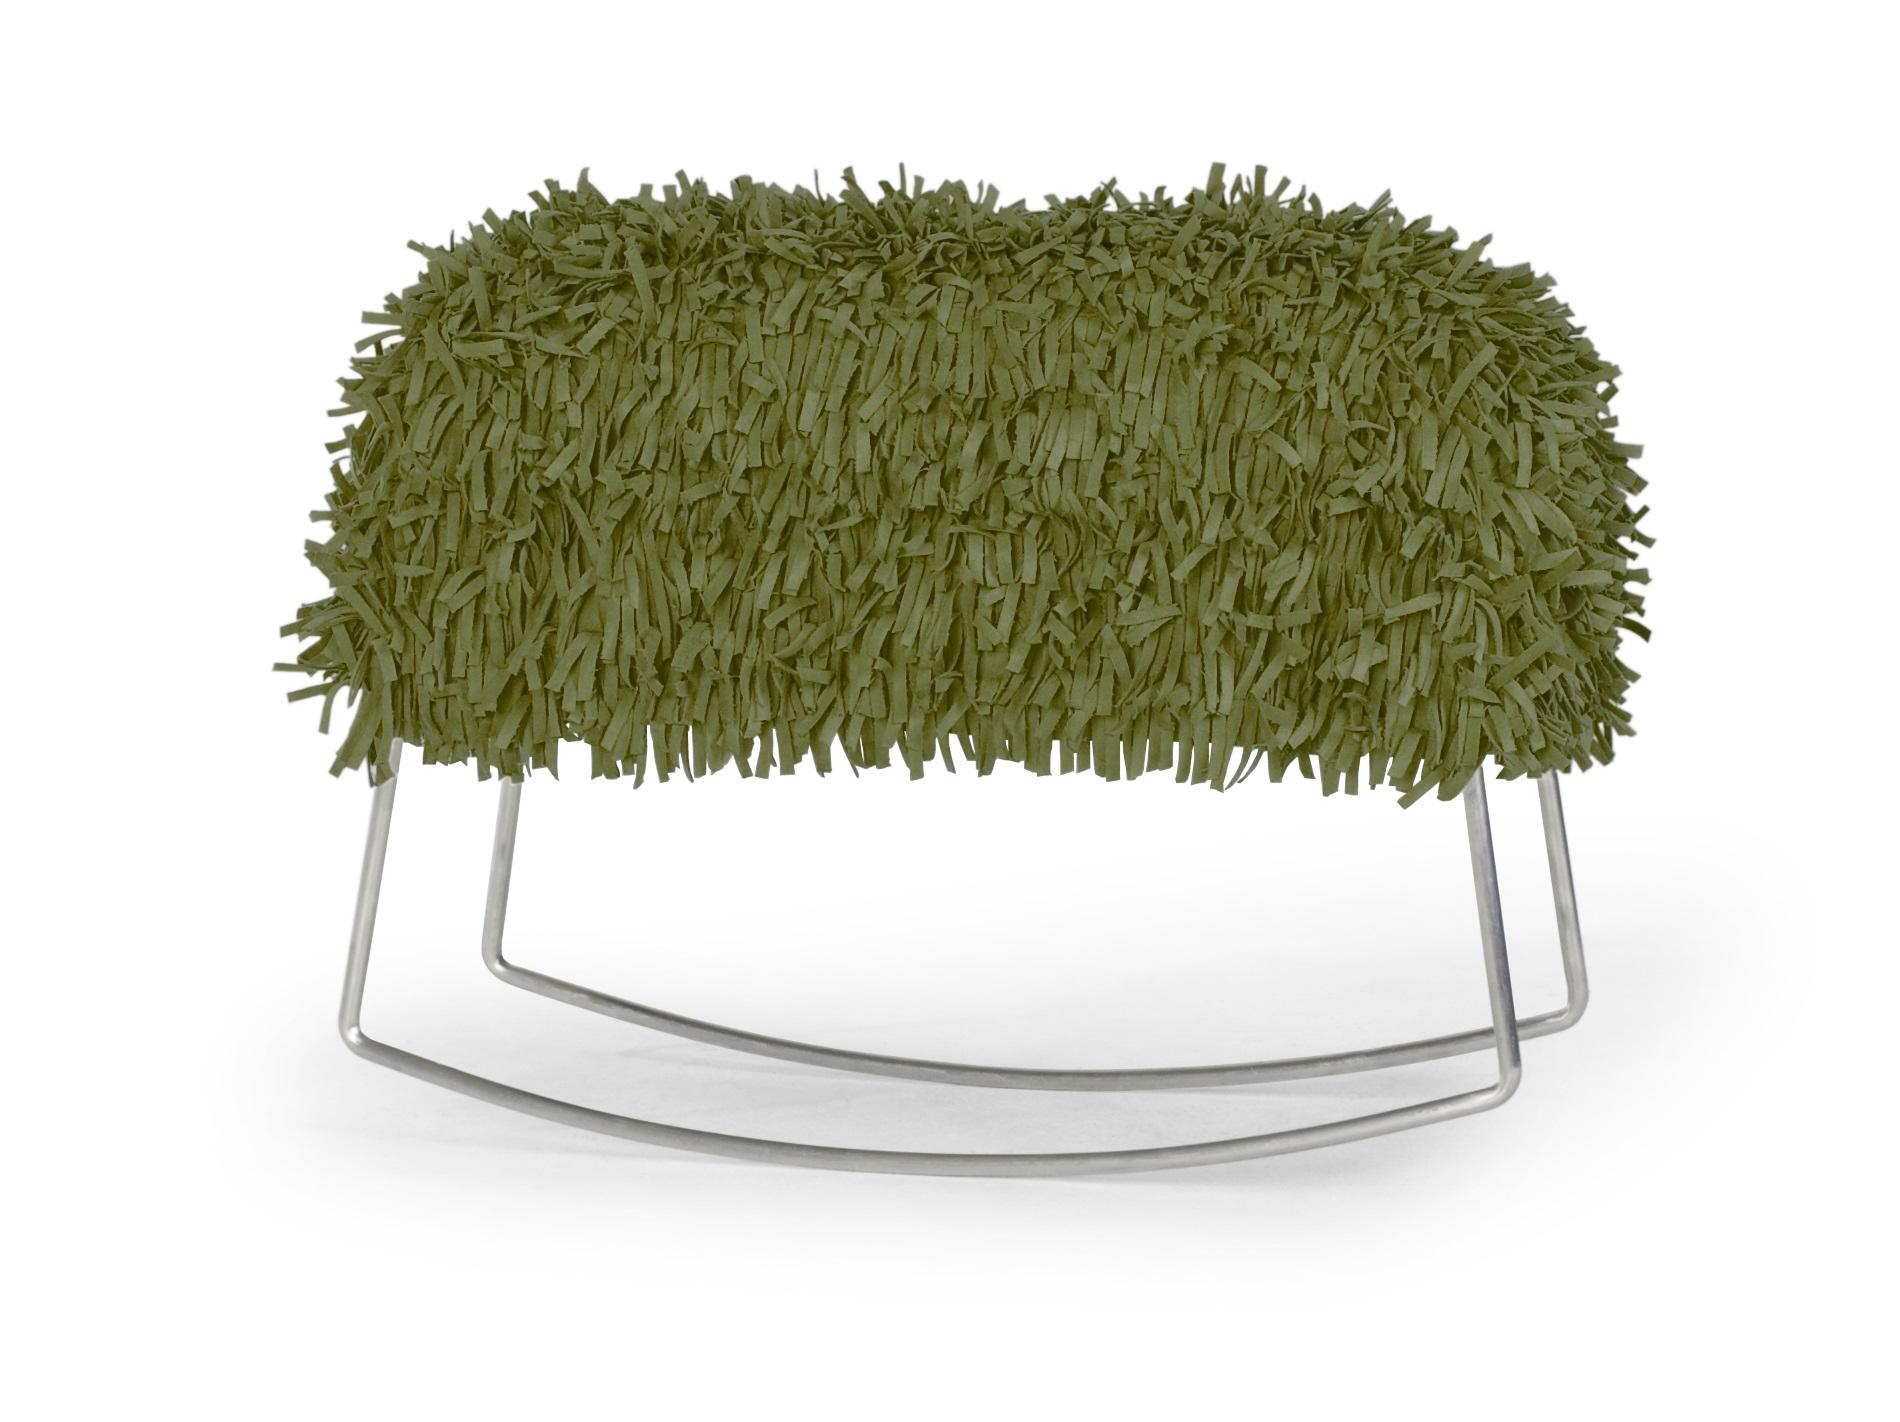 Moss green harry rocking chair by Kenneth Cobonpue
Materials: Microfiber, Urethane foam, Stainless Steel, Plywood. 
Also available in other colors. Please contact us for more information. 
Dimensions: 28cm x 67cm x H 55cm

Harry brings the fun